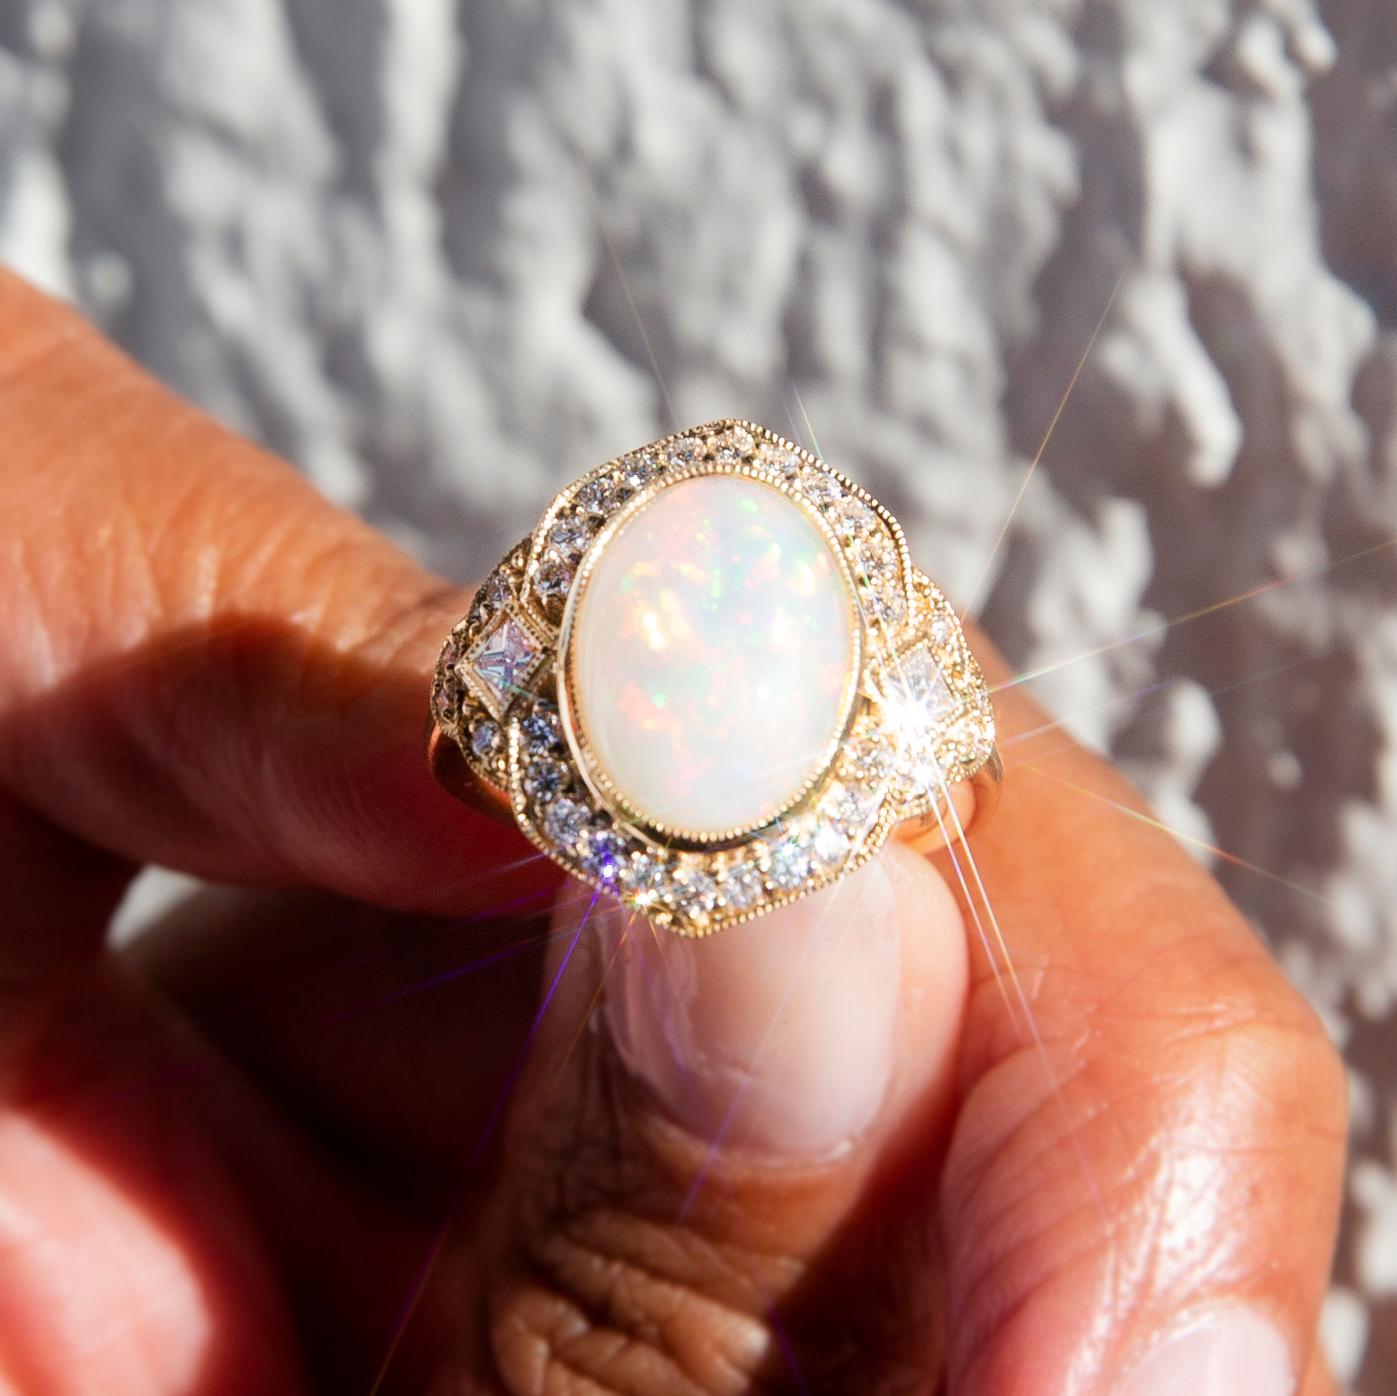 Lovingly crafted in 18 carat gold, this stunning art-deco-inspired contemporary ring has a captivating oval Australian crystal opal at her centre afire with bright flashes of orange, green, and red play of colour. This fabulous gemstone rests in a